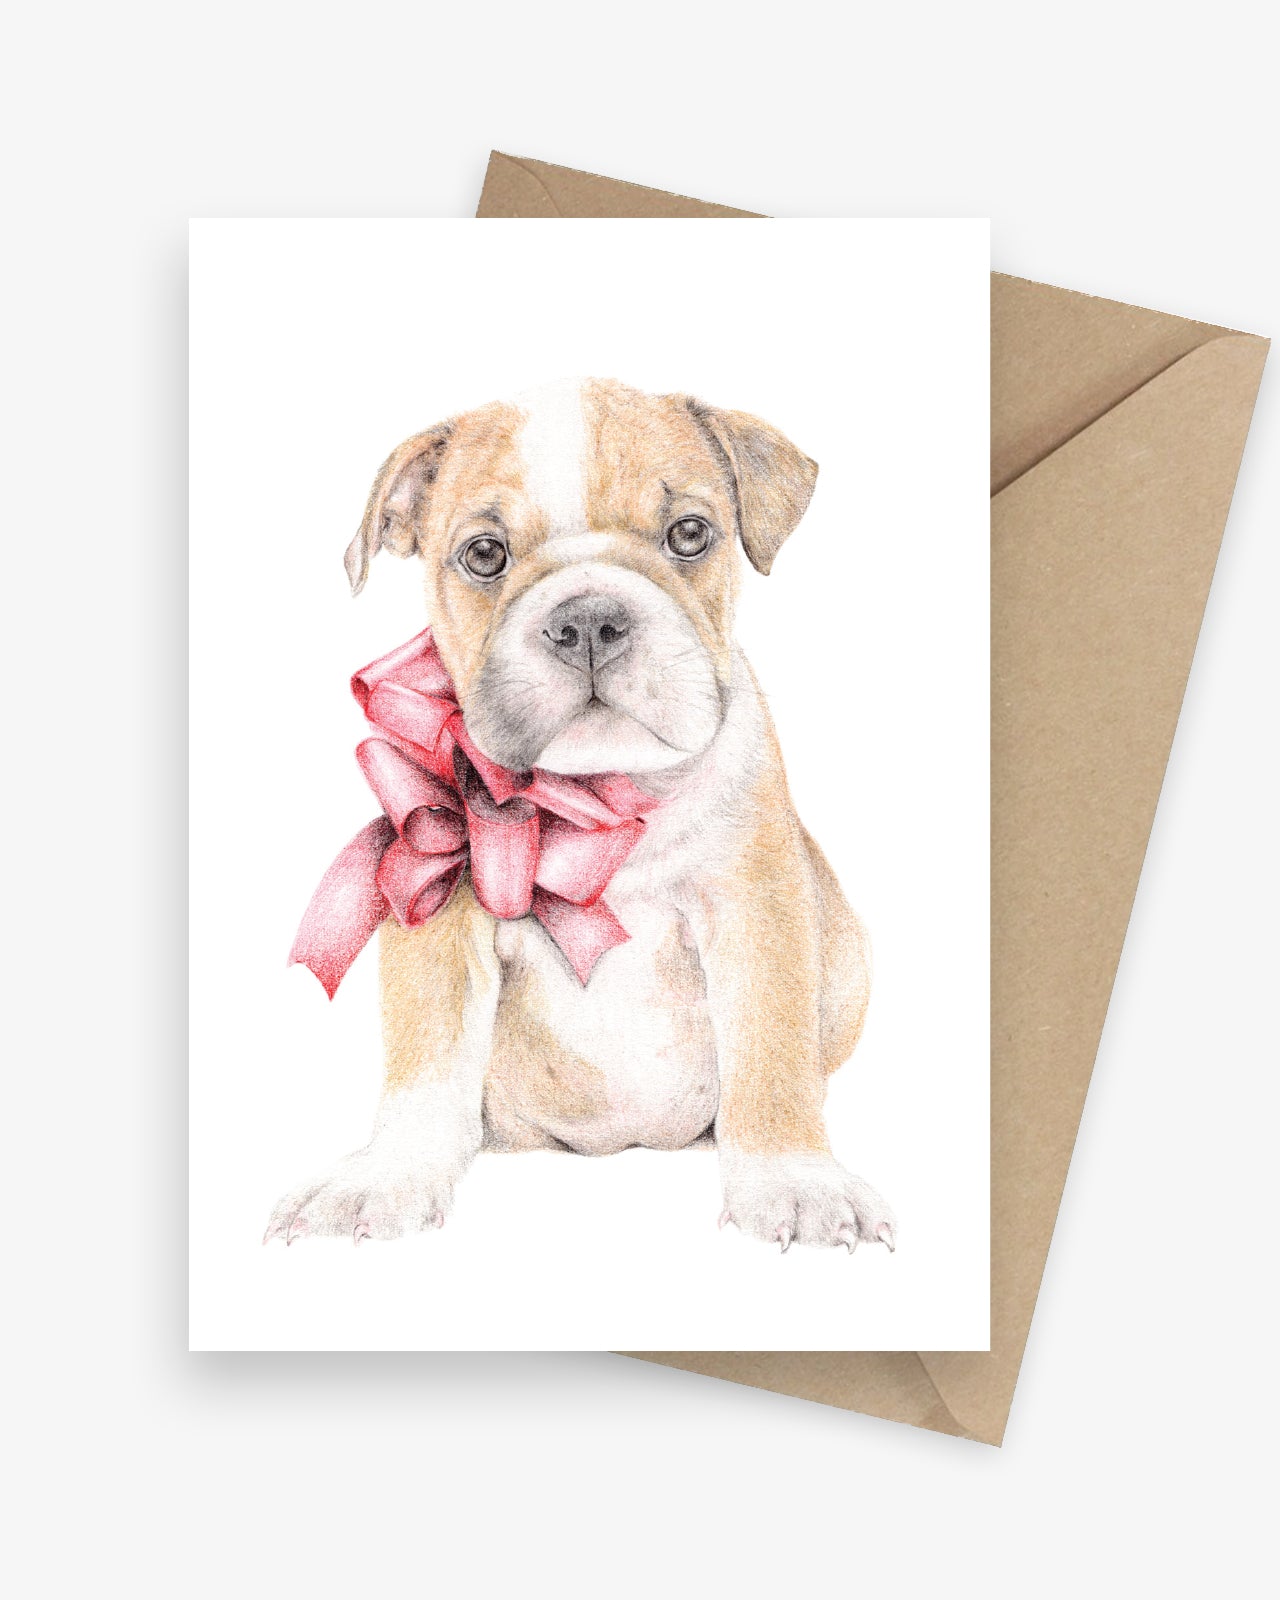 Illustrated greeting card featuring a British Bulldog puppy with a big red bow.